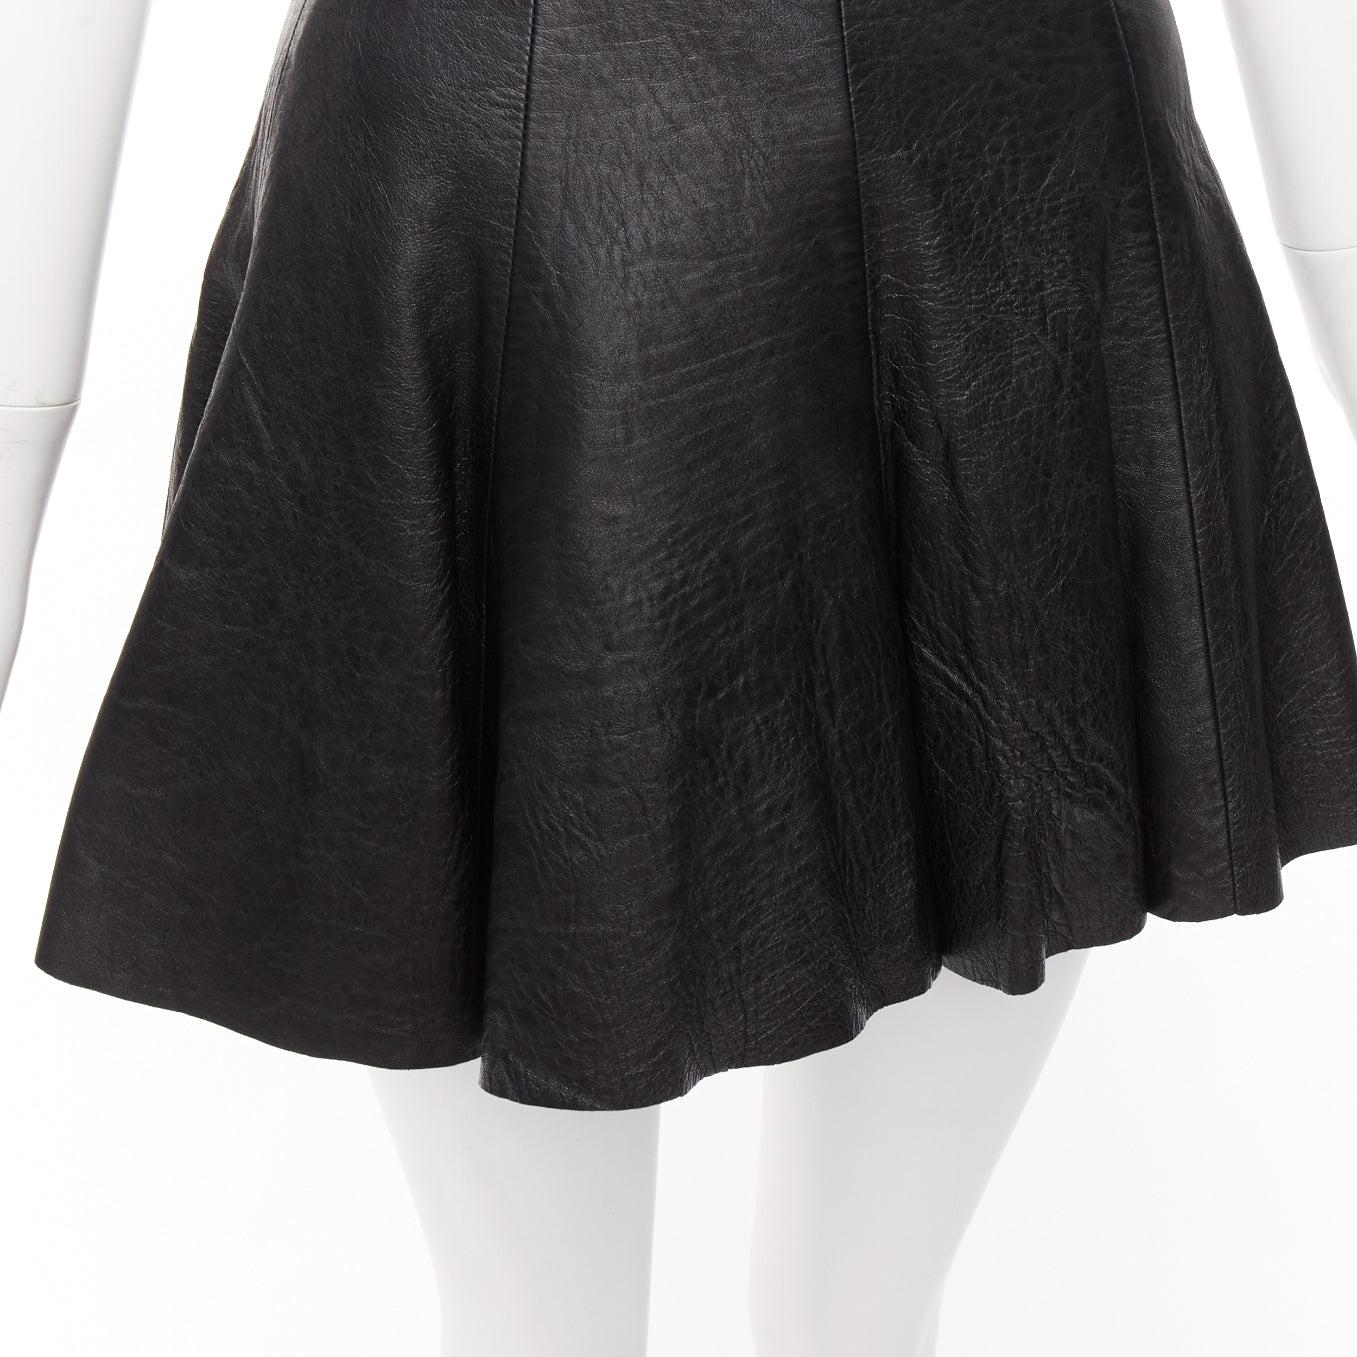 SAINT LAURENT 2016 black lambskin leather silk lined skater skirt FR34 XS
Reference: YIKK/A00003
Brand: Saint Laurent
Designer: Anthony Vaccarello
Collection: 2016
Material: Lambskin Leather
Color: Black
Pattern: Solid
Closure: Zip
Lining: Black